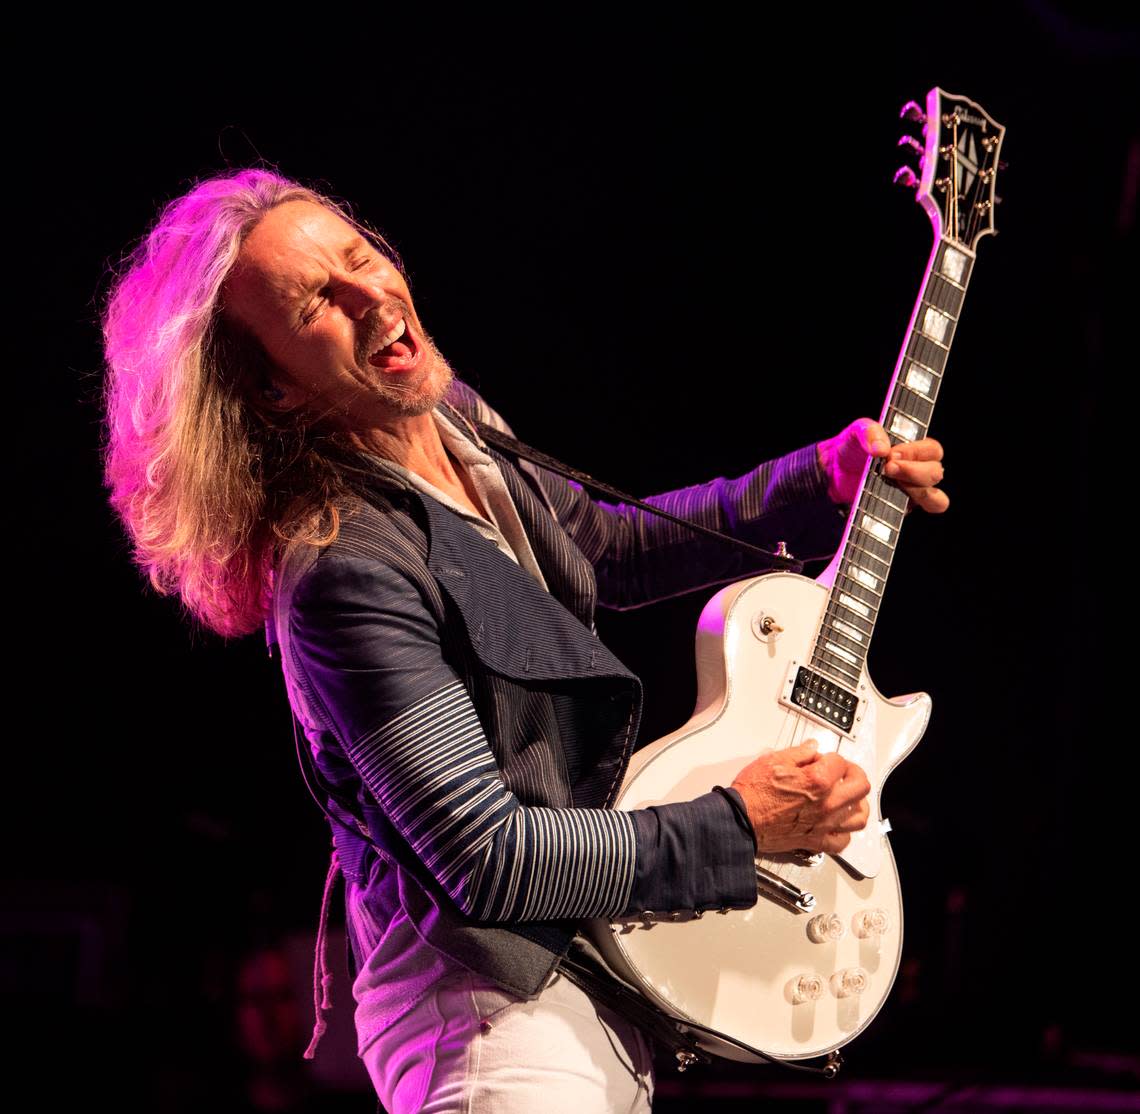 Tommy Shaw and Styx in concert at Raleigh, N.C.’s Coastal Credit Union Music Pavilion at Walnut Creek, Wednesday night, Aug. 10, 2022.